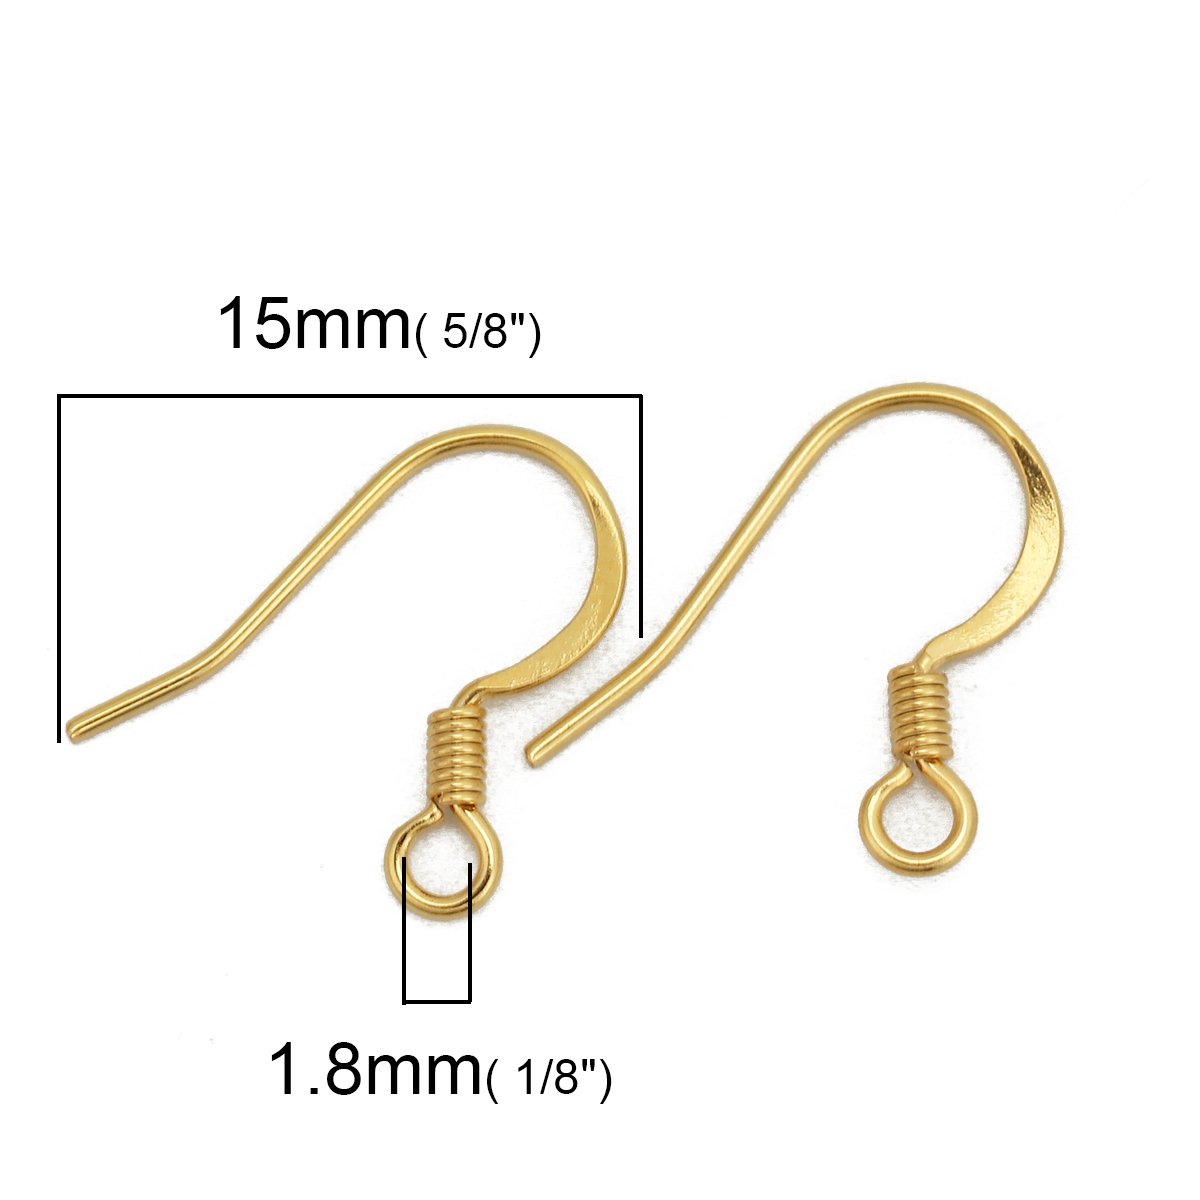 Picture of 316 Stainless Steel Ear Wire Hooks Earring Findings Gold Plated W/ Loop 15mm( 5/8") x 13mm( 4/8"), Post/ Wire Size: (21 gauge), 20 PCs